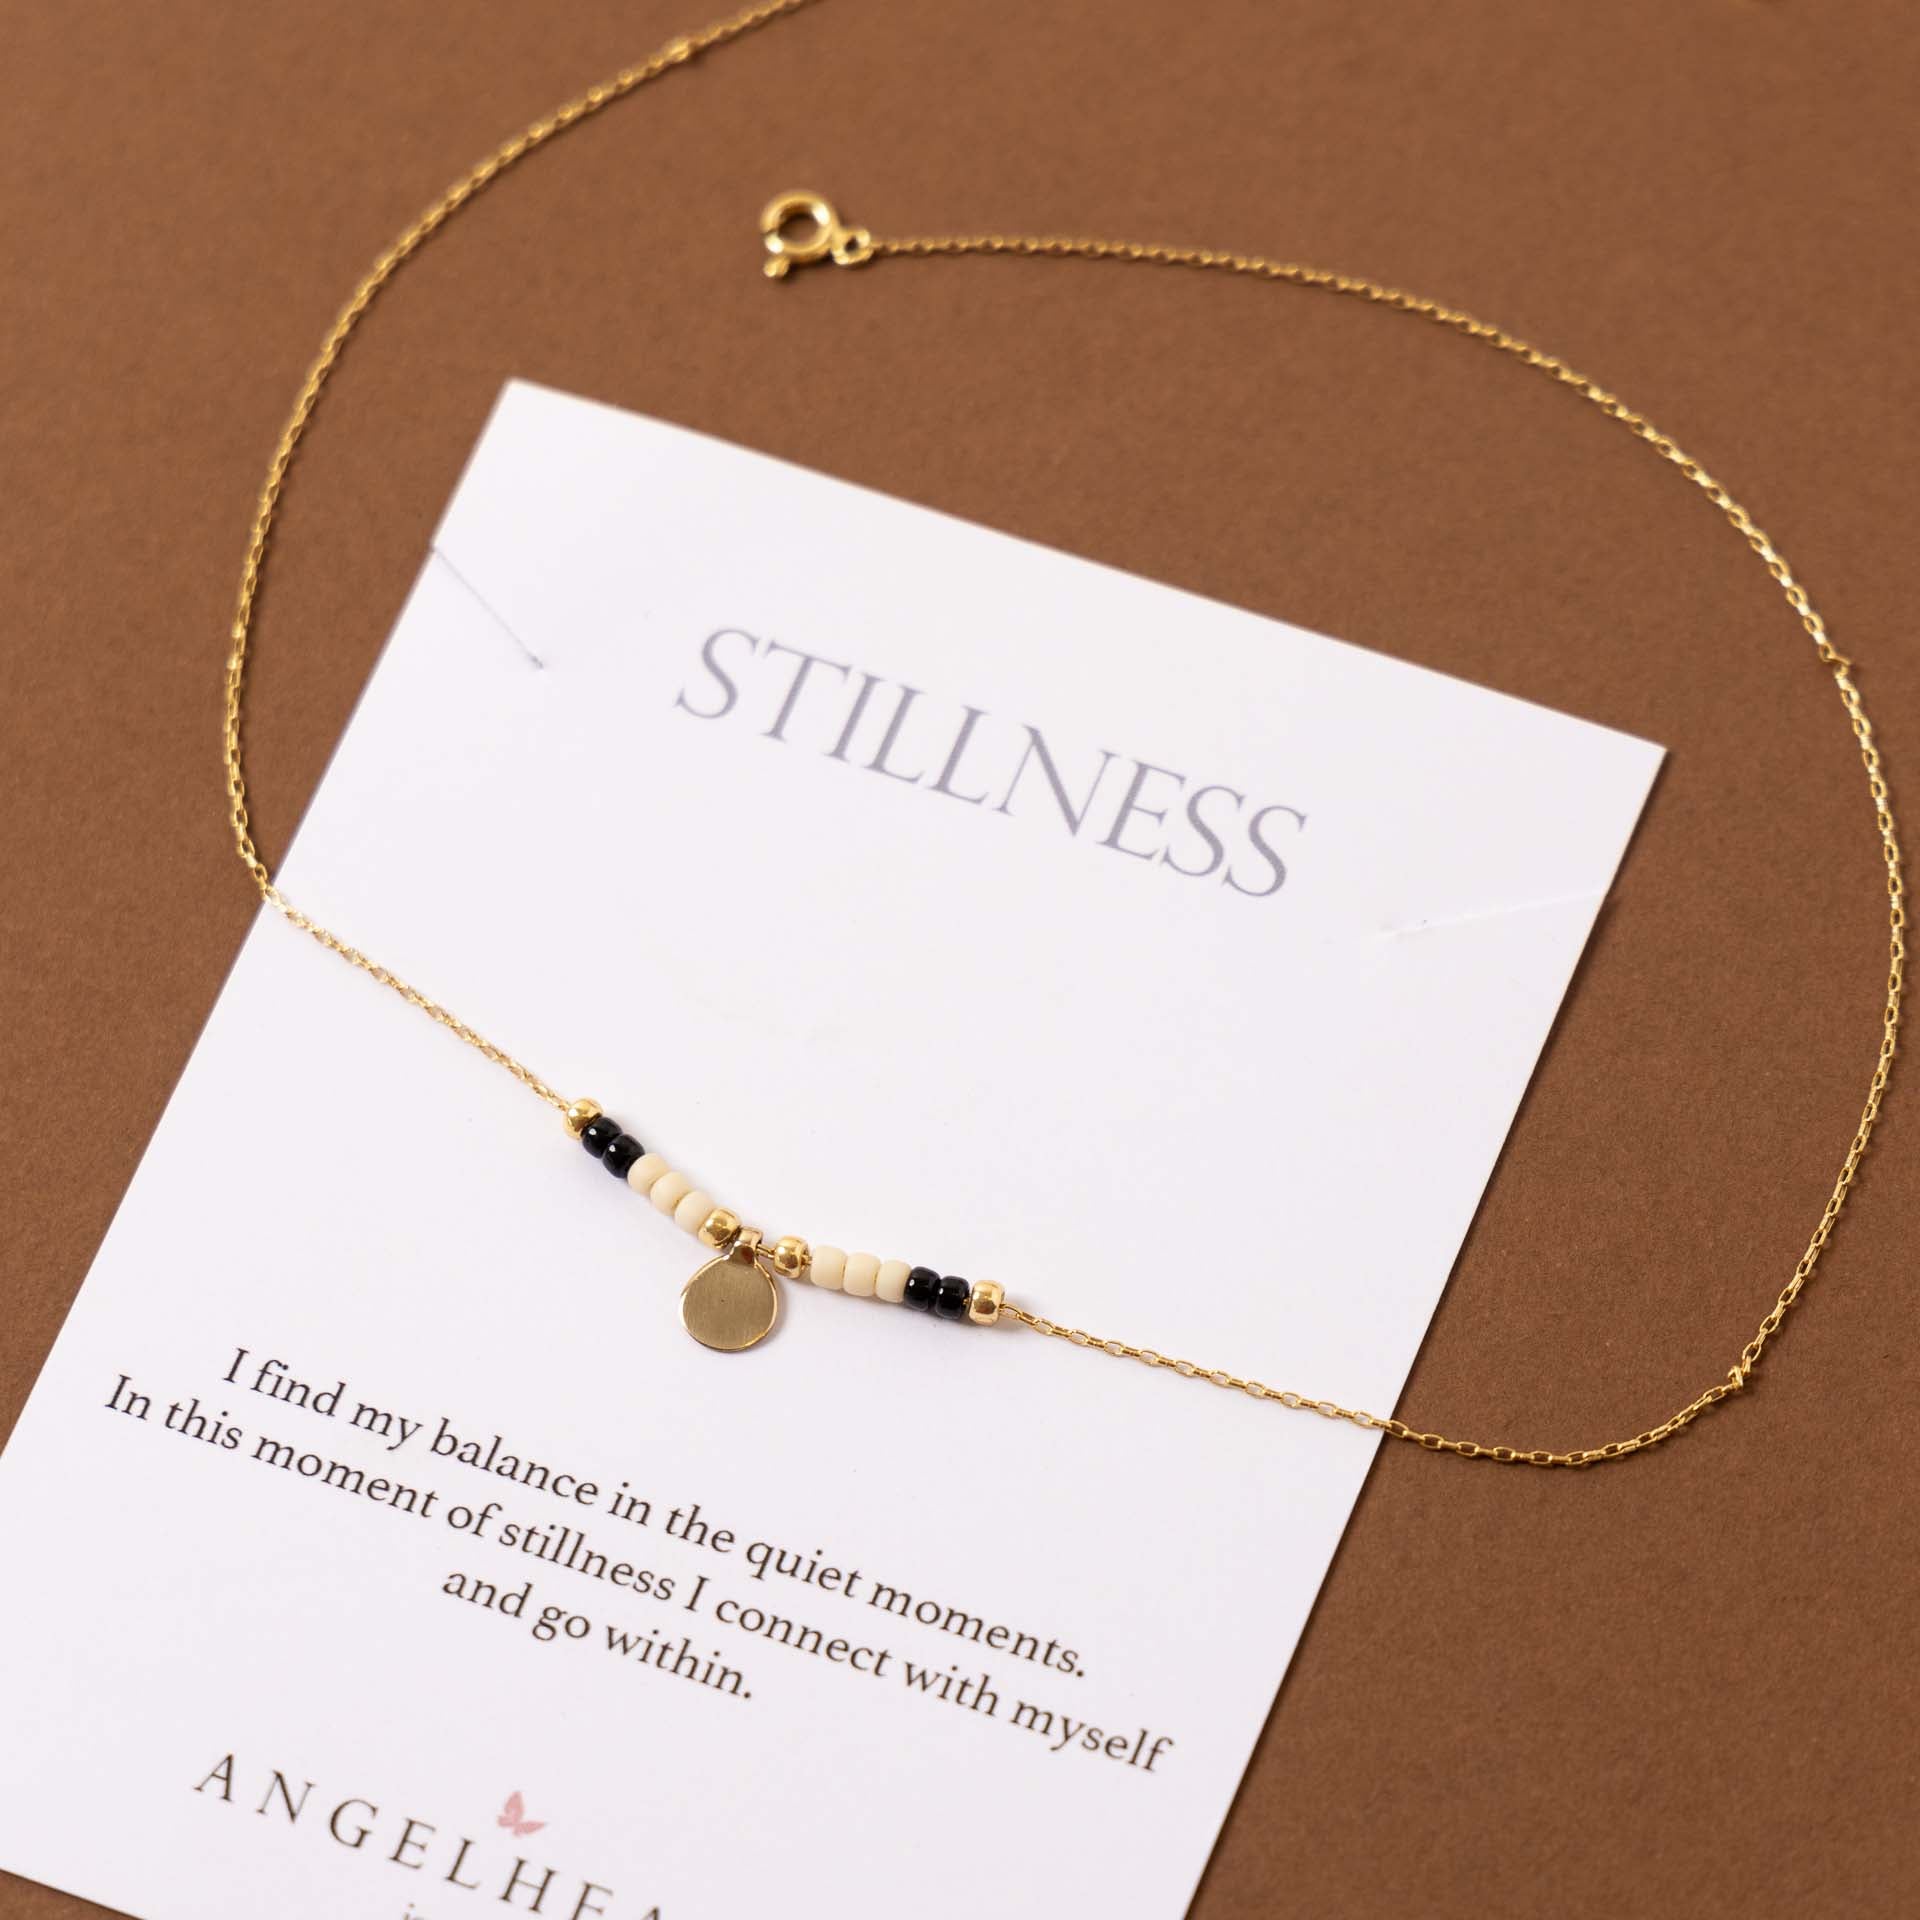 "Stillness" Beaded Charm Necklace (Sterling Silver / Gold-Plated)